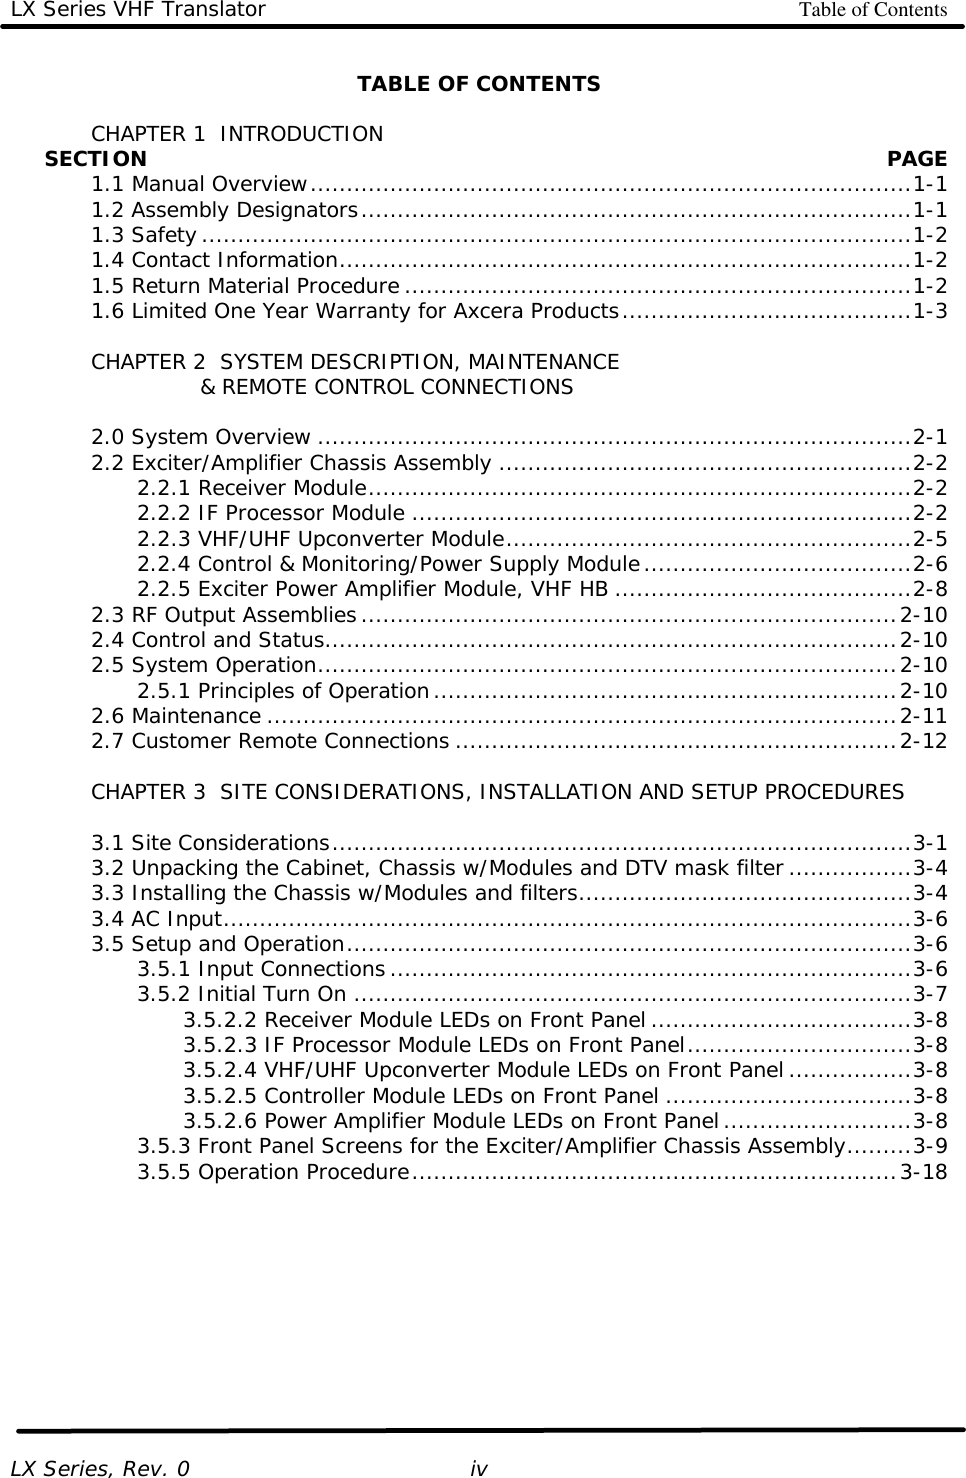 LX Series VHF Translator Table of Contents   LX Series, Rev. 0   ivTABLE OF CONTENTS   CHAPTER 1  INTRODUCTION      SECTION    PAGE  1.1 Manual Overview...................................................................................1-1  1.2 Assembly Designators............................................................................1-1  1.3 Safety..................................................................................................1-2  1.4 Contact Information...............................................................................1-2  1.5 Return Material Procedure ......................................................................1-2  1.6 Limited One Year Warranty for Axcera Products........................................1-3   CHAPTER 2  SYSTEM DESCRIPTION, MAINTENANCE              &amp; REMOTE CONTROL CONNECTIONS   2.0 System Overview ..................................................................................2-1  2.2 Exciter/Amplifier Chassis Assembly .........................................................2-2     2.2.1 Receiver Module...........................................................................2-2     2.2.2 IF Processor Module .....................................................................2-2     2.2.3 VHF/UHF Upconverter Module........................................................2-5     2.2.4 Control &amp; Monitoring/Power Supply Module.....................................2-6     2.2.5 Exciter Power Amplifier Module, VHF HB .........................................2-8  2.3 RF Output Assemblies..........................................................................2-10  2.4 Control and Status...............................................................................2-10  2.5 System Operation................................................................................2-10     2.5.1 Principles of Operation................................................................2-10  2.6 Maintenance .......................................................................................2-11  2.7 Customer Remote Connections .............................................................2-12   CHAPTER 3  SITE CONSIDERATIONS, INSTALLATION AND SETUP PROCEDURES     3.1 Site Considerations................................................................................3-1  3.2 Unpacking the Cabinet, Chassis w/Modules and DTV mask filter .................3-4  3.3 Installing the Chassis w/Modules and filters..............................................3-4  3.4 AC Input...............................................................................................3-6  3.5 Setup and Operation..............................................................................3-6     3.5.1 Input Connections........................................................................3-6     3.5.2 Initial Turn On .............................................................................3-7     3.5.2.2 Receiver Module LEDs on Front Panel ....................................3-8     3.5.2.3 IF Processor Module LEDs on Front Panel...............................3-8     3.5.2.4 VHF/UHF Upconverter Module LEDs on Front Panel .................3-8     3.5.2.5 Controller Module LEDs on Front Panel ..................................3-8     3.5.2.6 Power Amplifier Module LEDs on Front Panel..........................3-8     3.5.3 Front Panel Screens for the Exciter/Amplifier Chassis Assembly.........3-9     3.5.5 Operation Procedure...................................................................3-18 